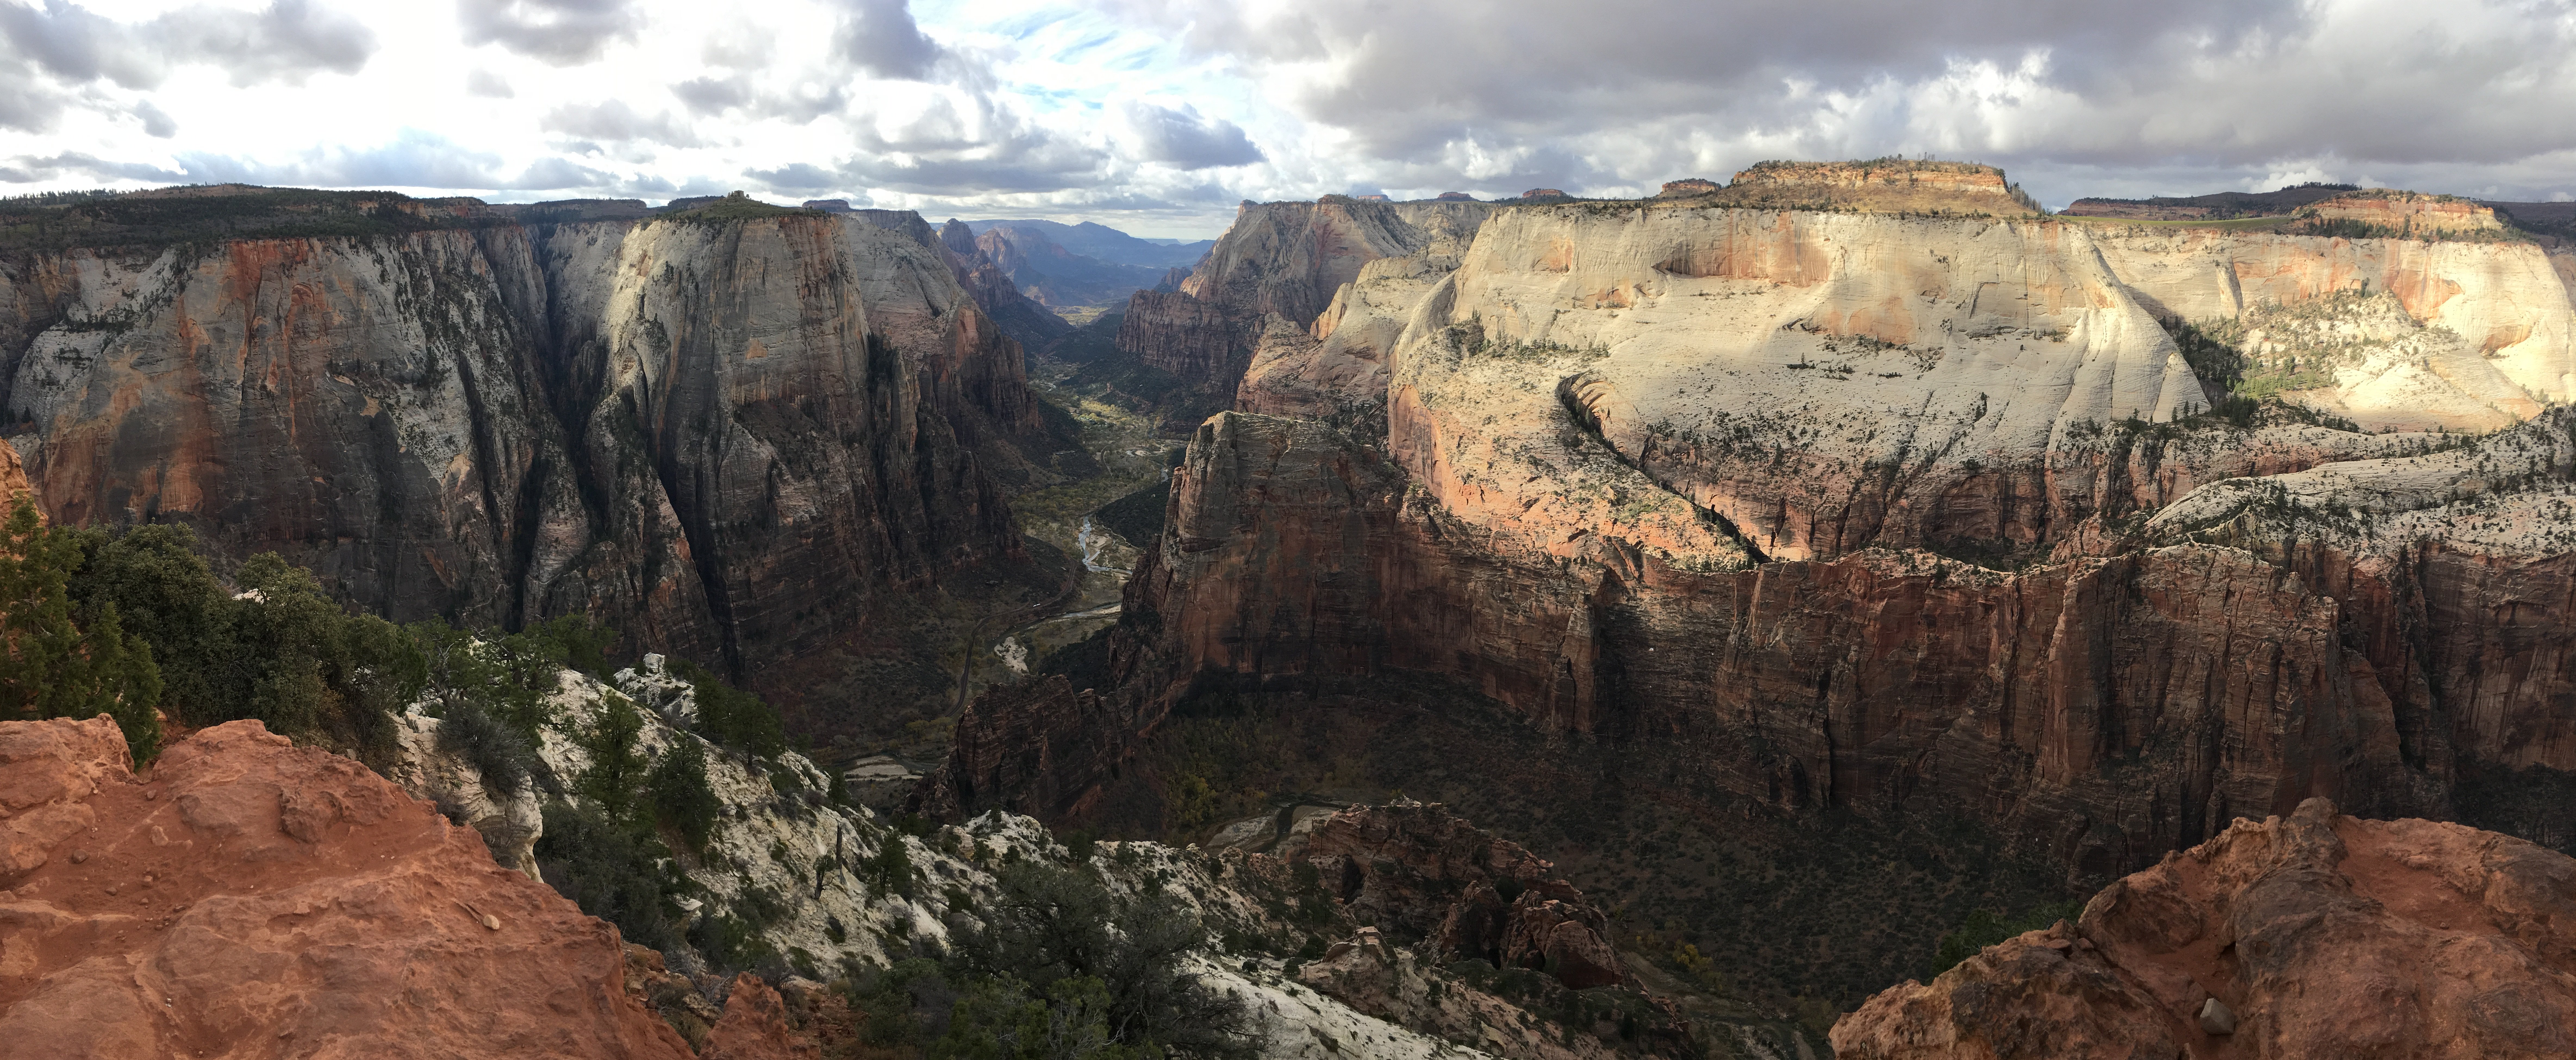 Observation Point, Zion National Park – Pictures, Maps & Tips